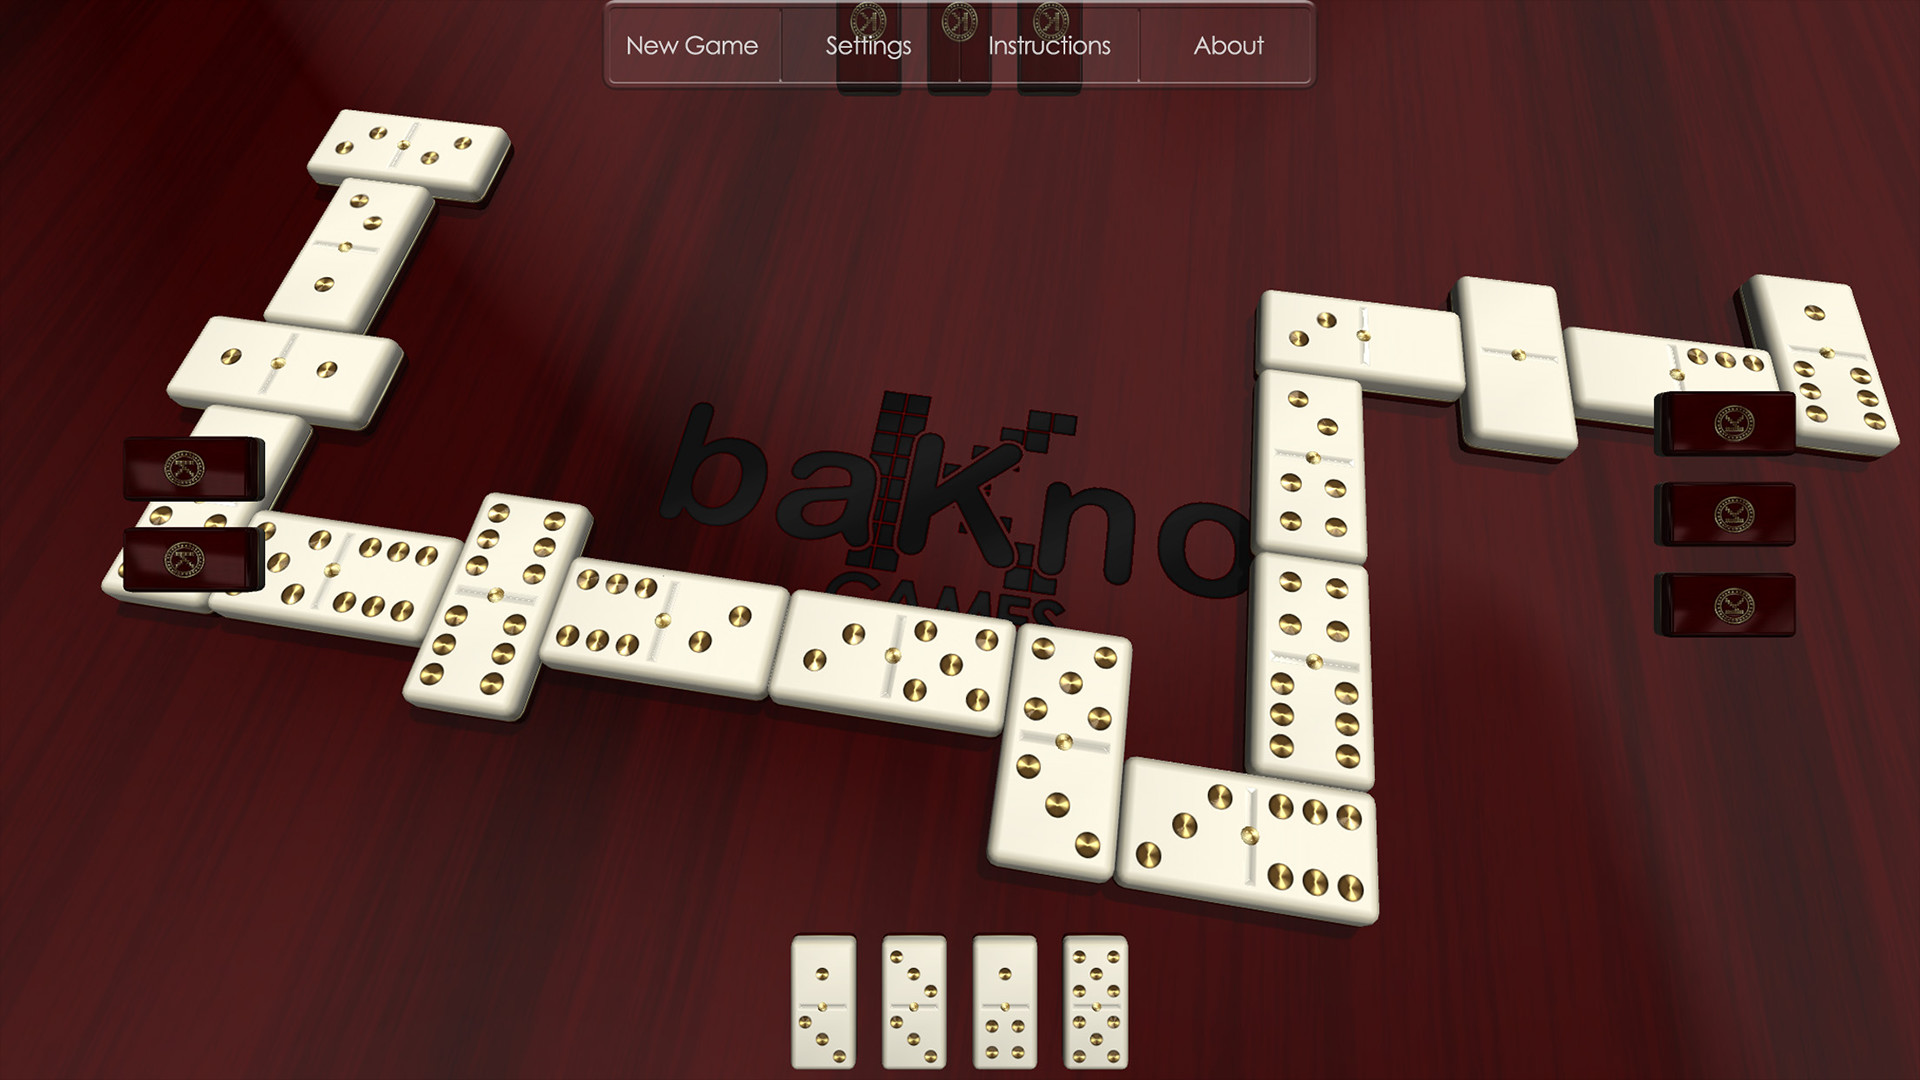 for ipod download Domino Multiplayer